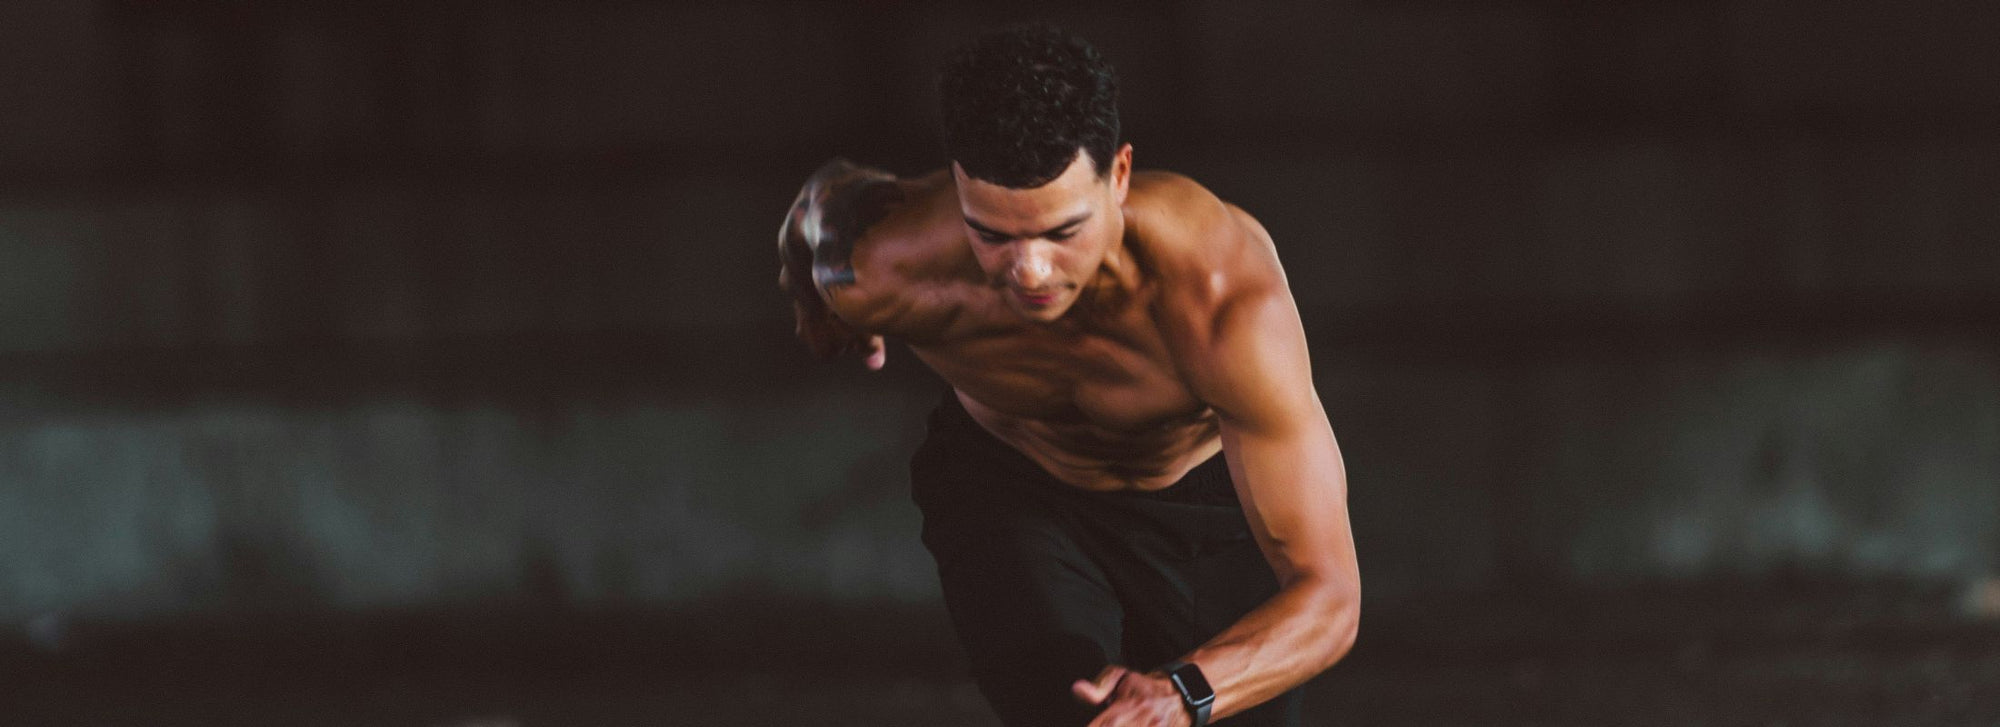 Elevate Your Cut: 5 Quick and Effective HIIT Workouts for Fat Loss and Muscle Maintenance